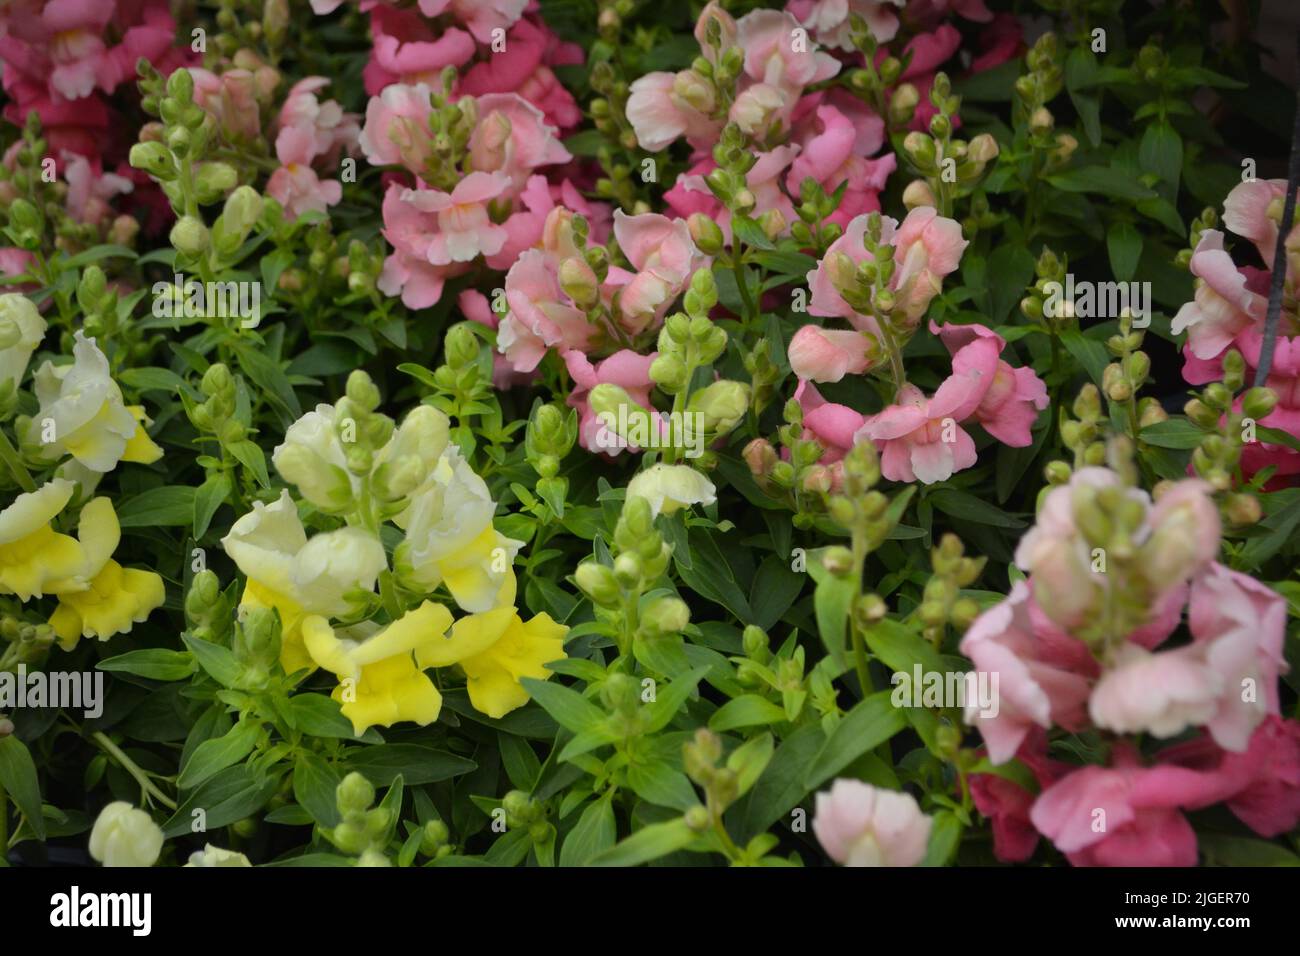 Impatiens balsamina, or known as balsam, garden balsam, rose balsam, touch-me-not or spotted snapweed. Stock Photo